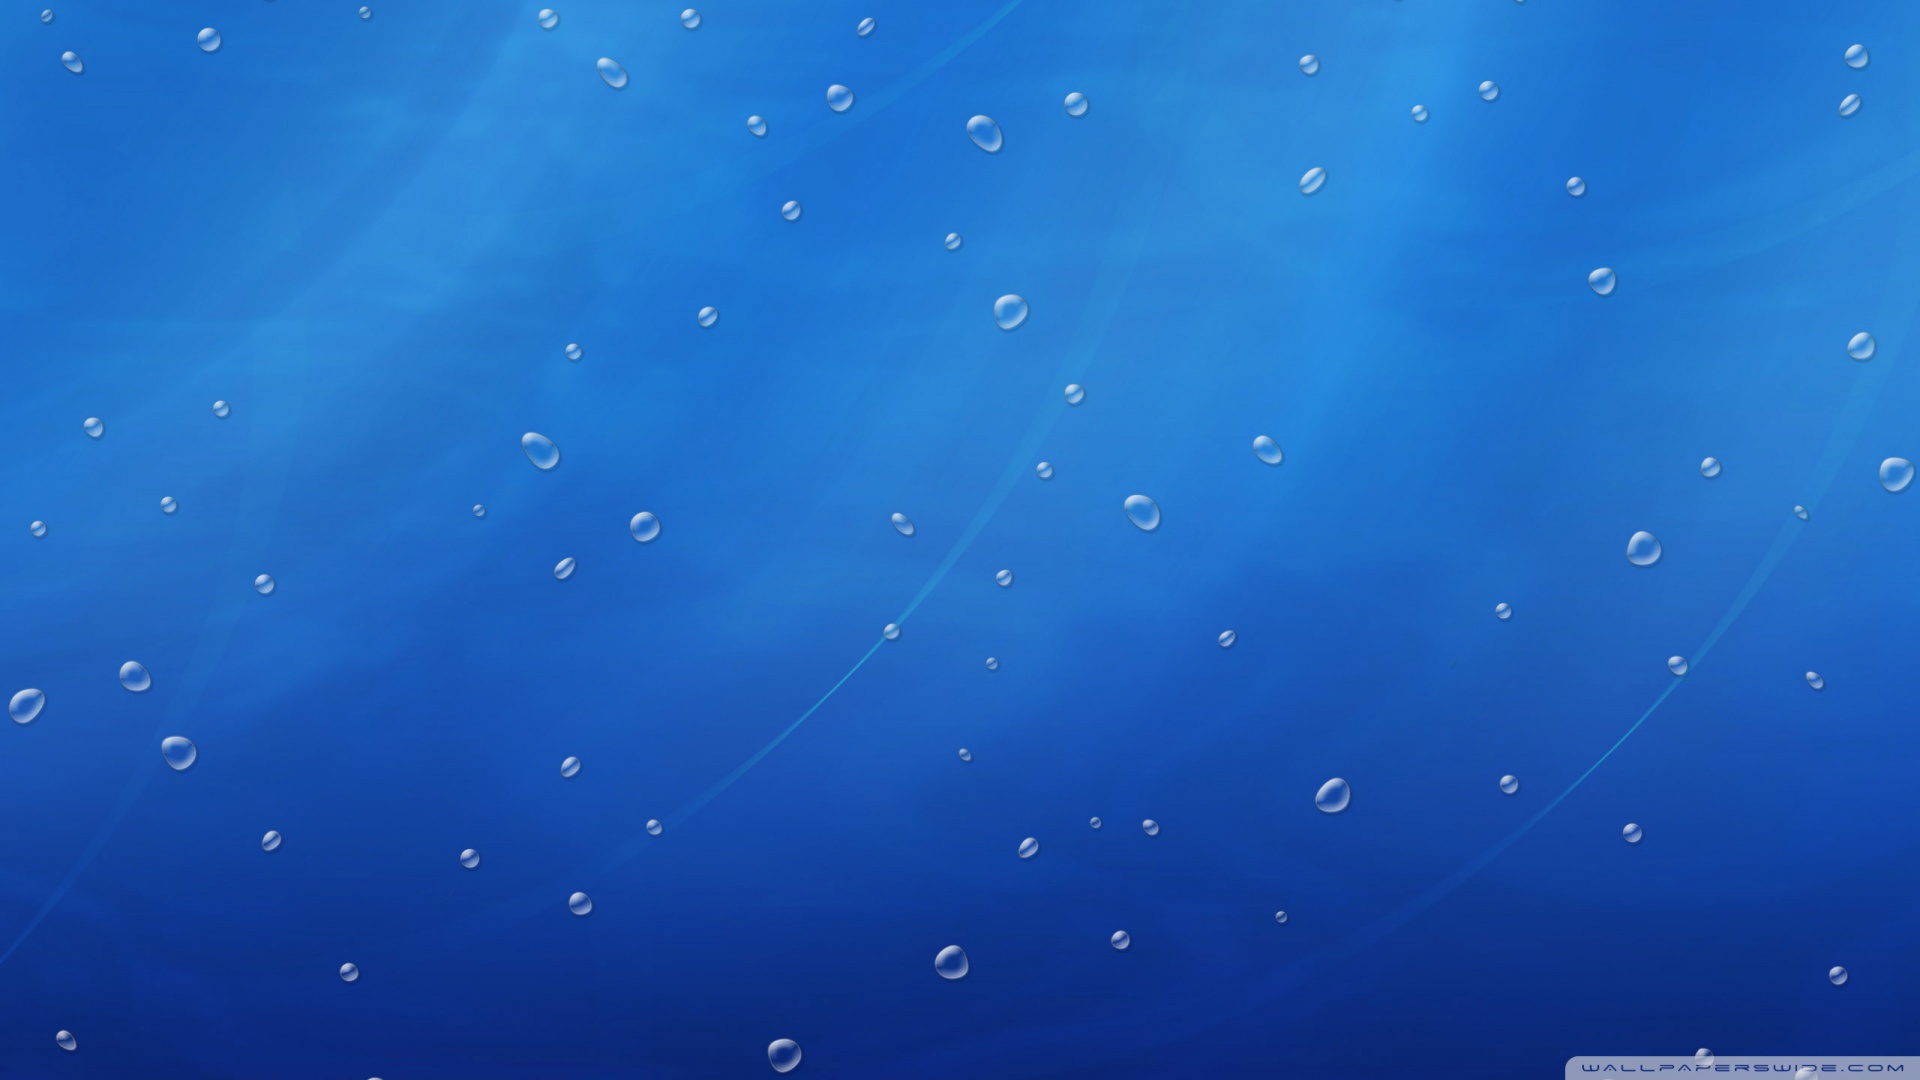 Dark Blue Background With Bubbles Wallpaper